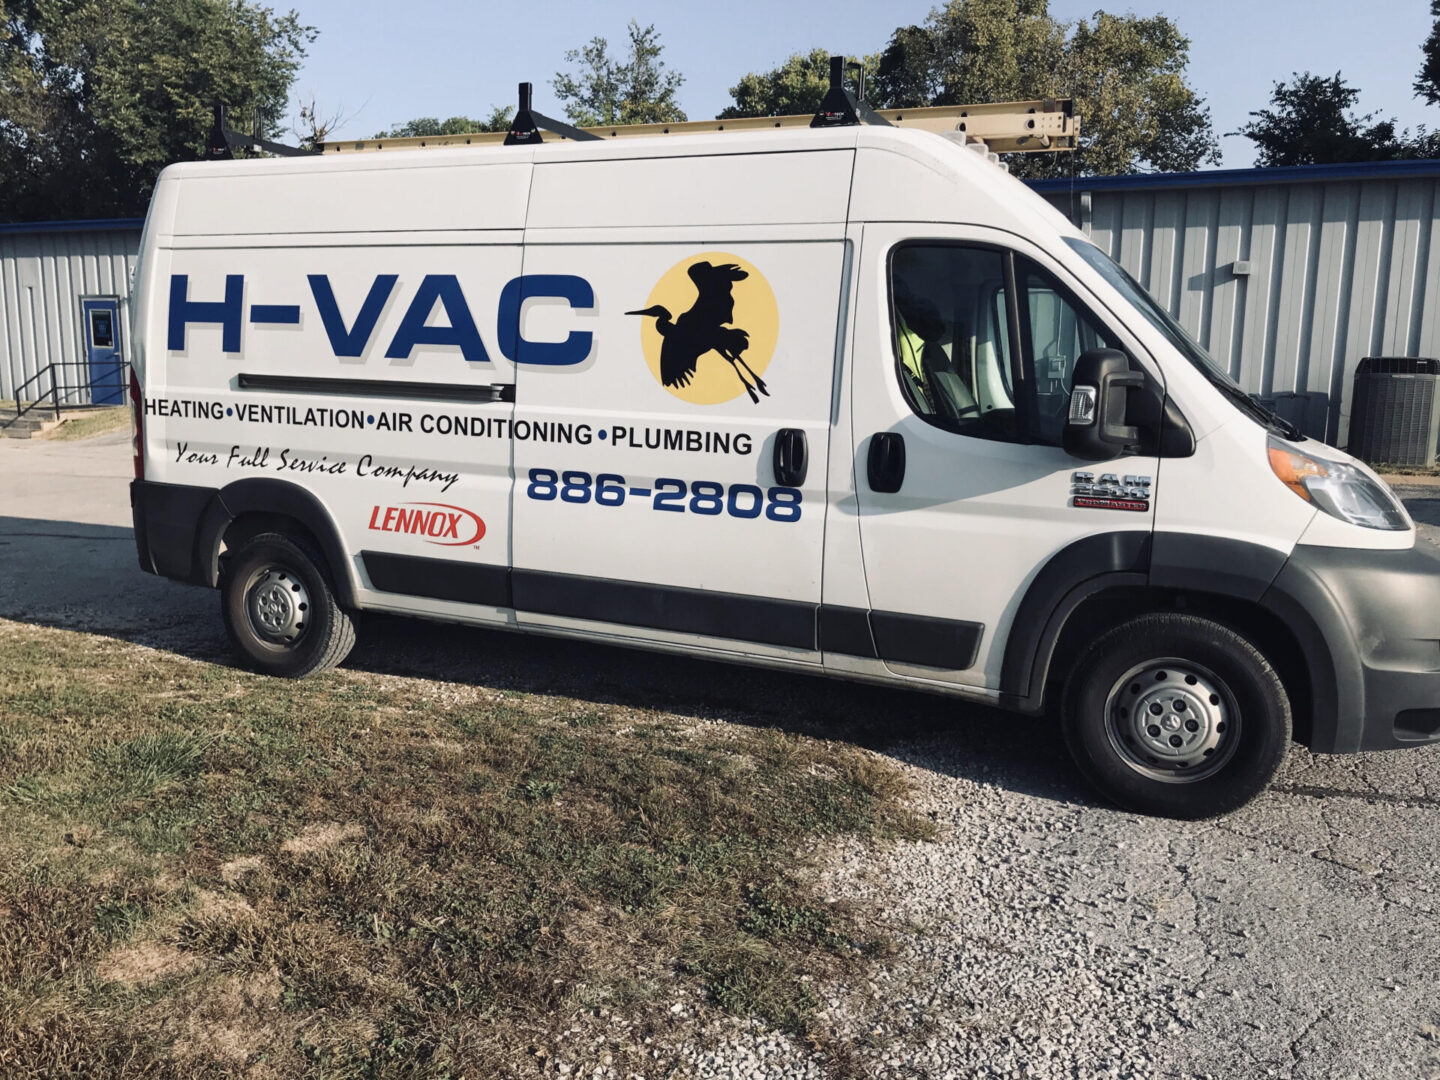 H-Vac and Central Plumbing, local plumber and hvac contractor company vehicle.